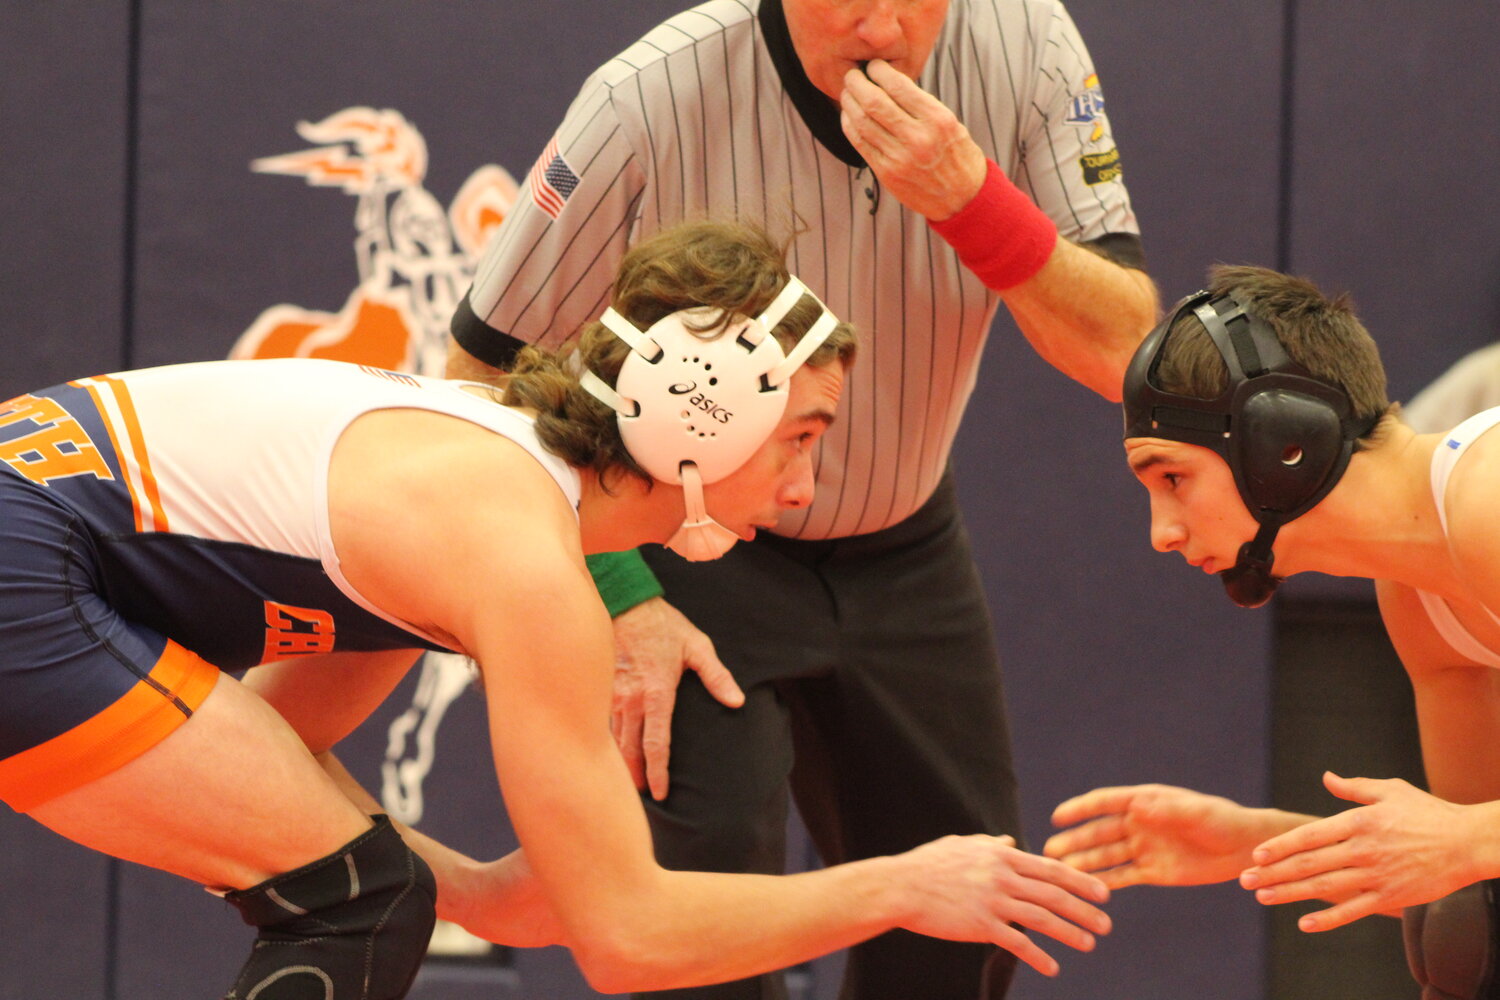 North Montgomery's Nolan Yarger took 3rd at 132 and will also be making his first appearance at semi-state.